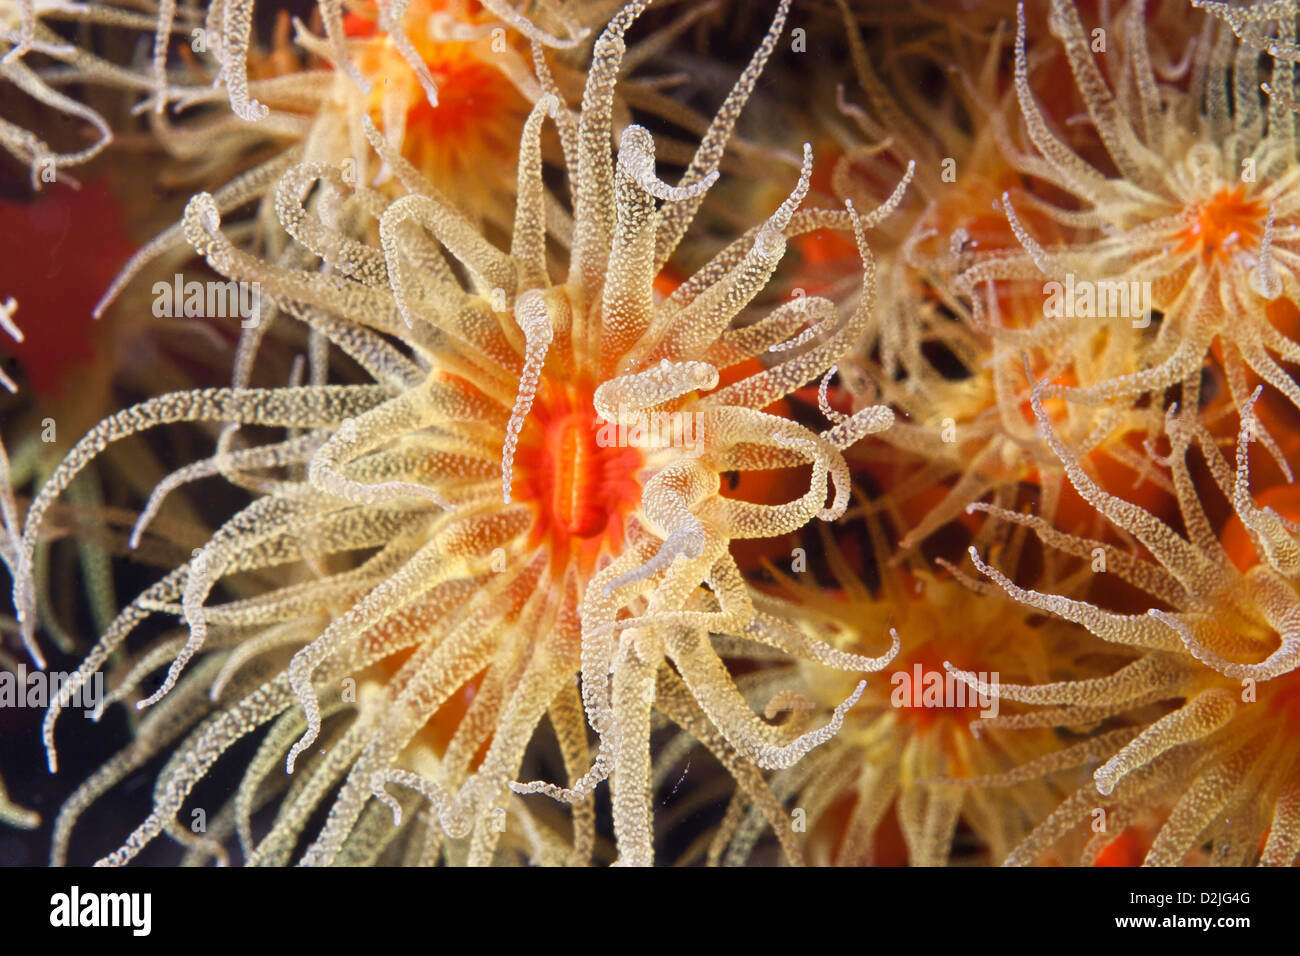 Red and yellow coral flowers underwater in Indonesia Stock Photo